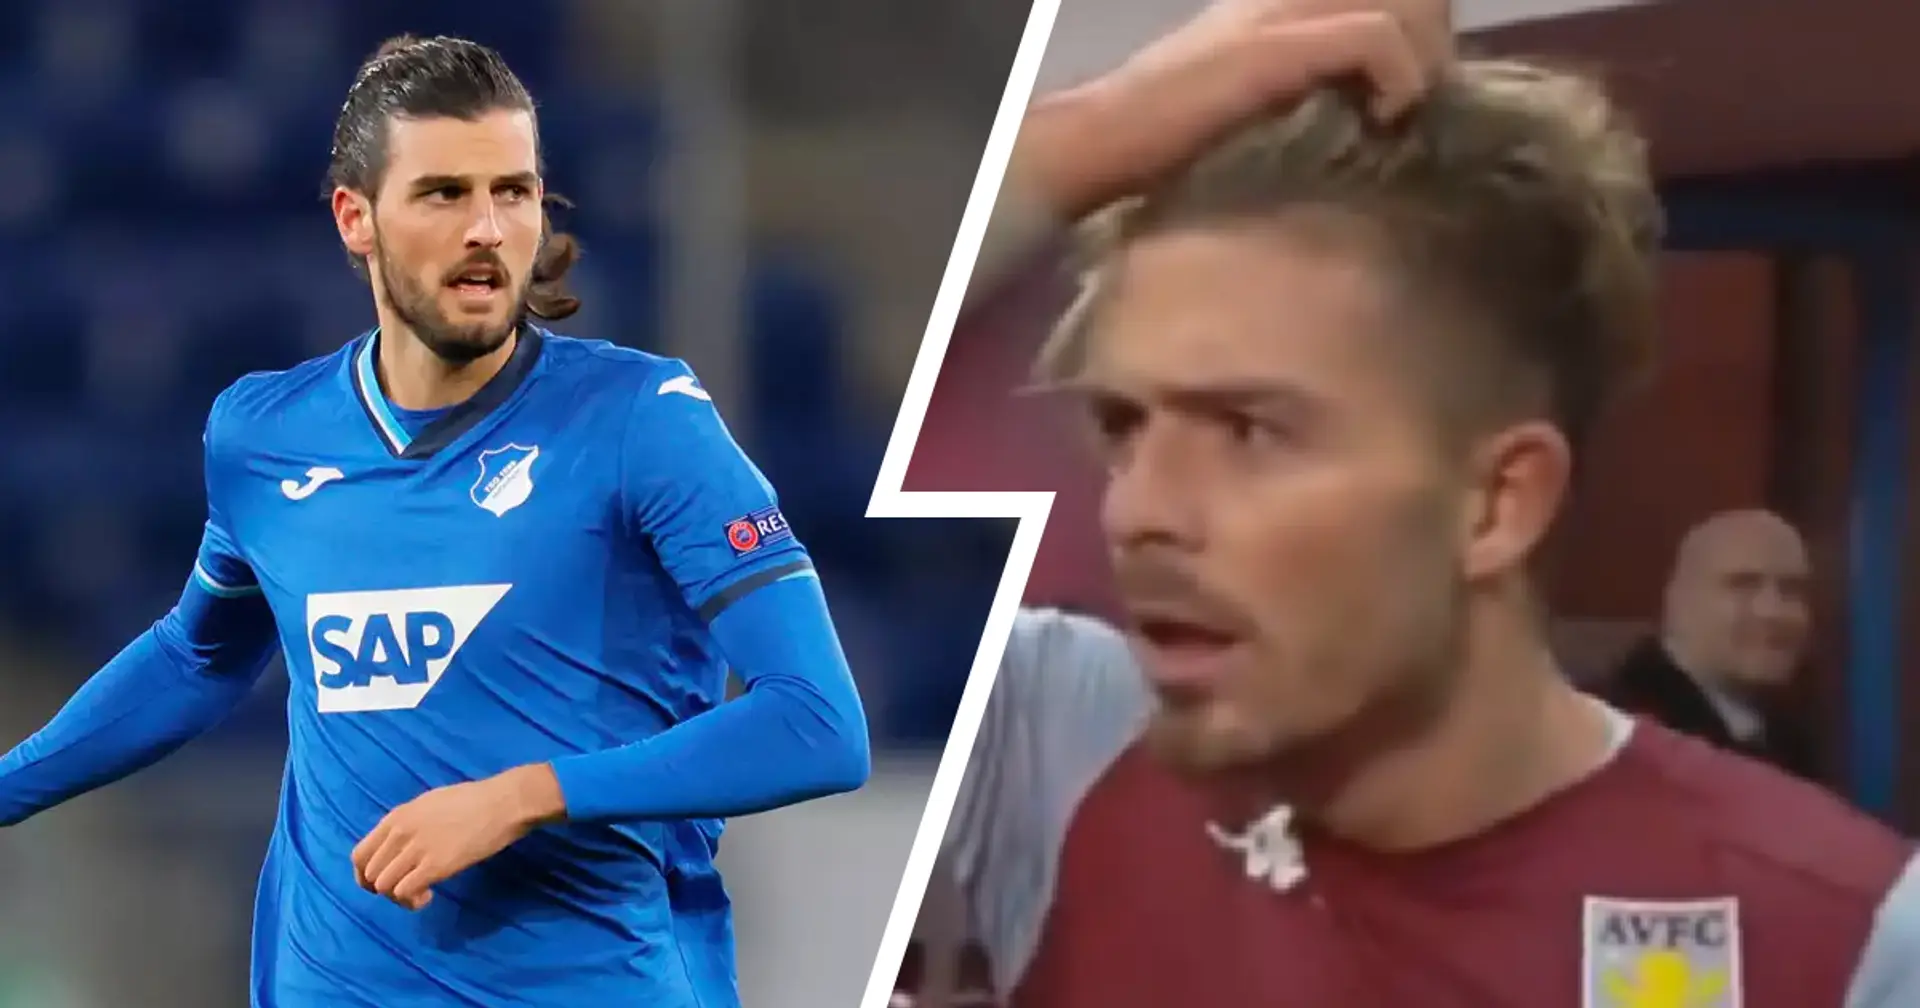 Grillitsch or Grealish? Arsenal fans hilariously debate who's more likely to join